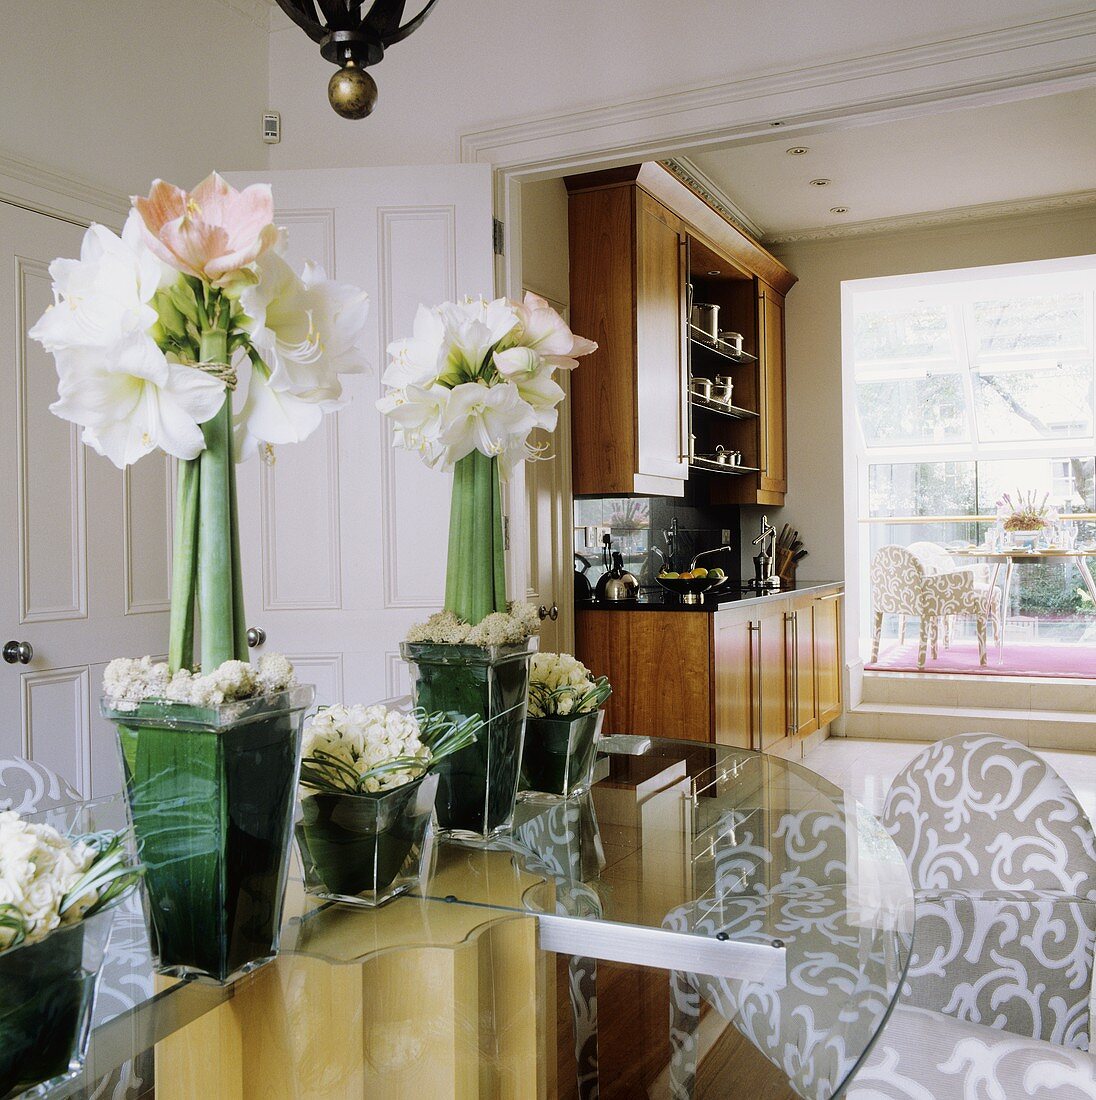 White amaryllis in a glass vase on a glass table with open swing doors and view of a fitted kitchen